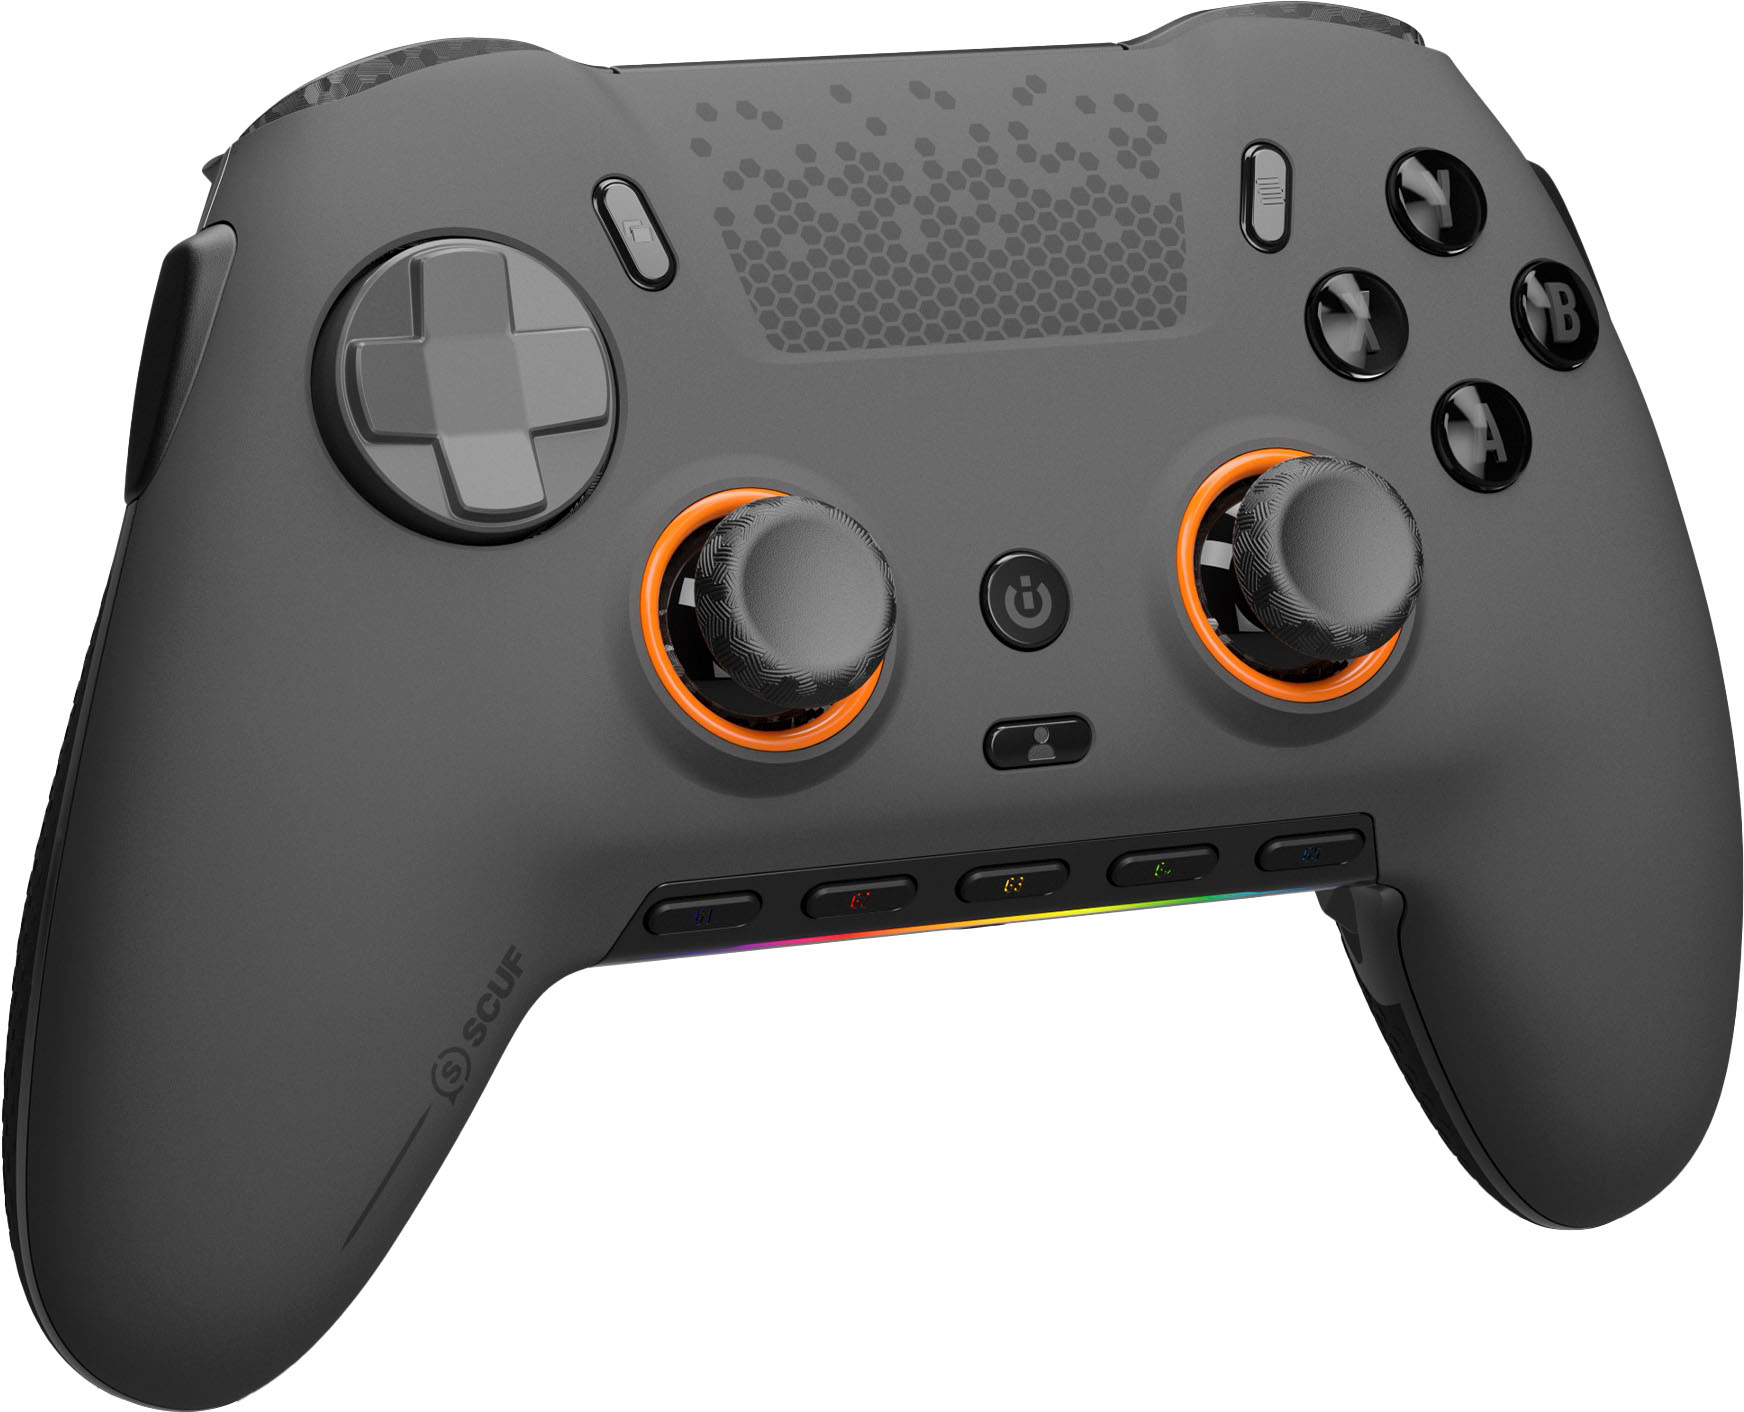 SCUF - Envision Pro Wireless Gaming Controller for PC - Steel Gray